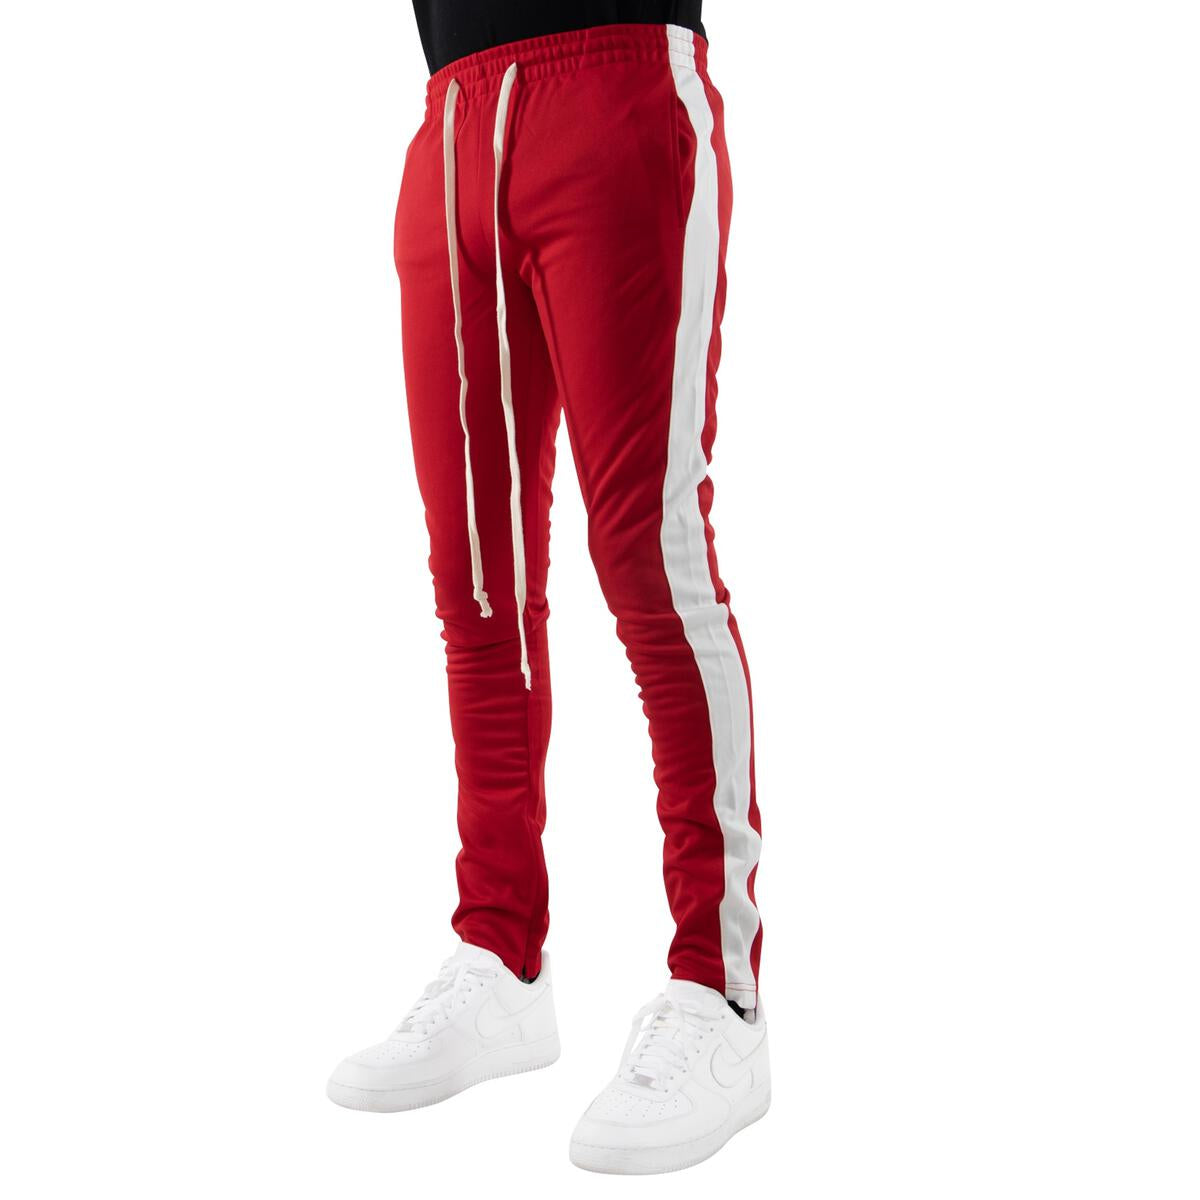 Track Pants In Red/White